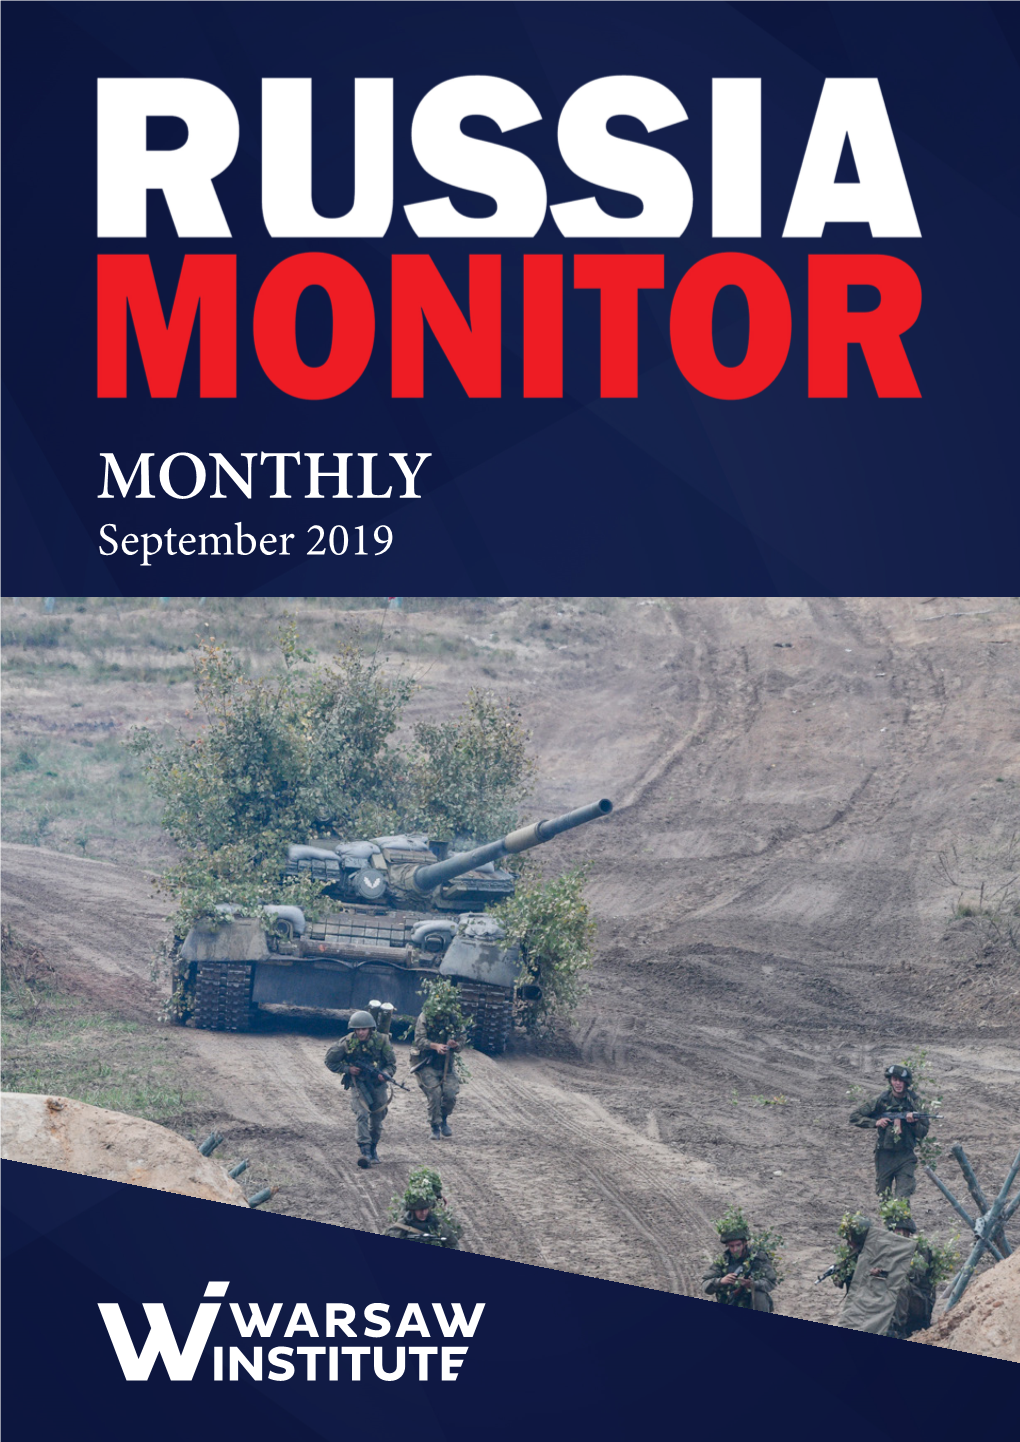 MONTHLY September 2019 CONTENTS